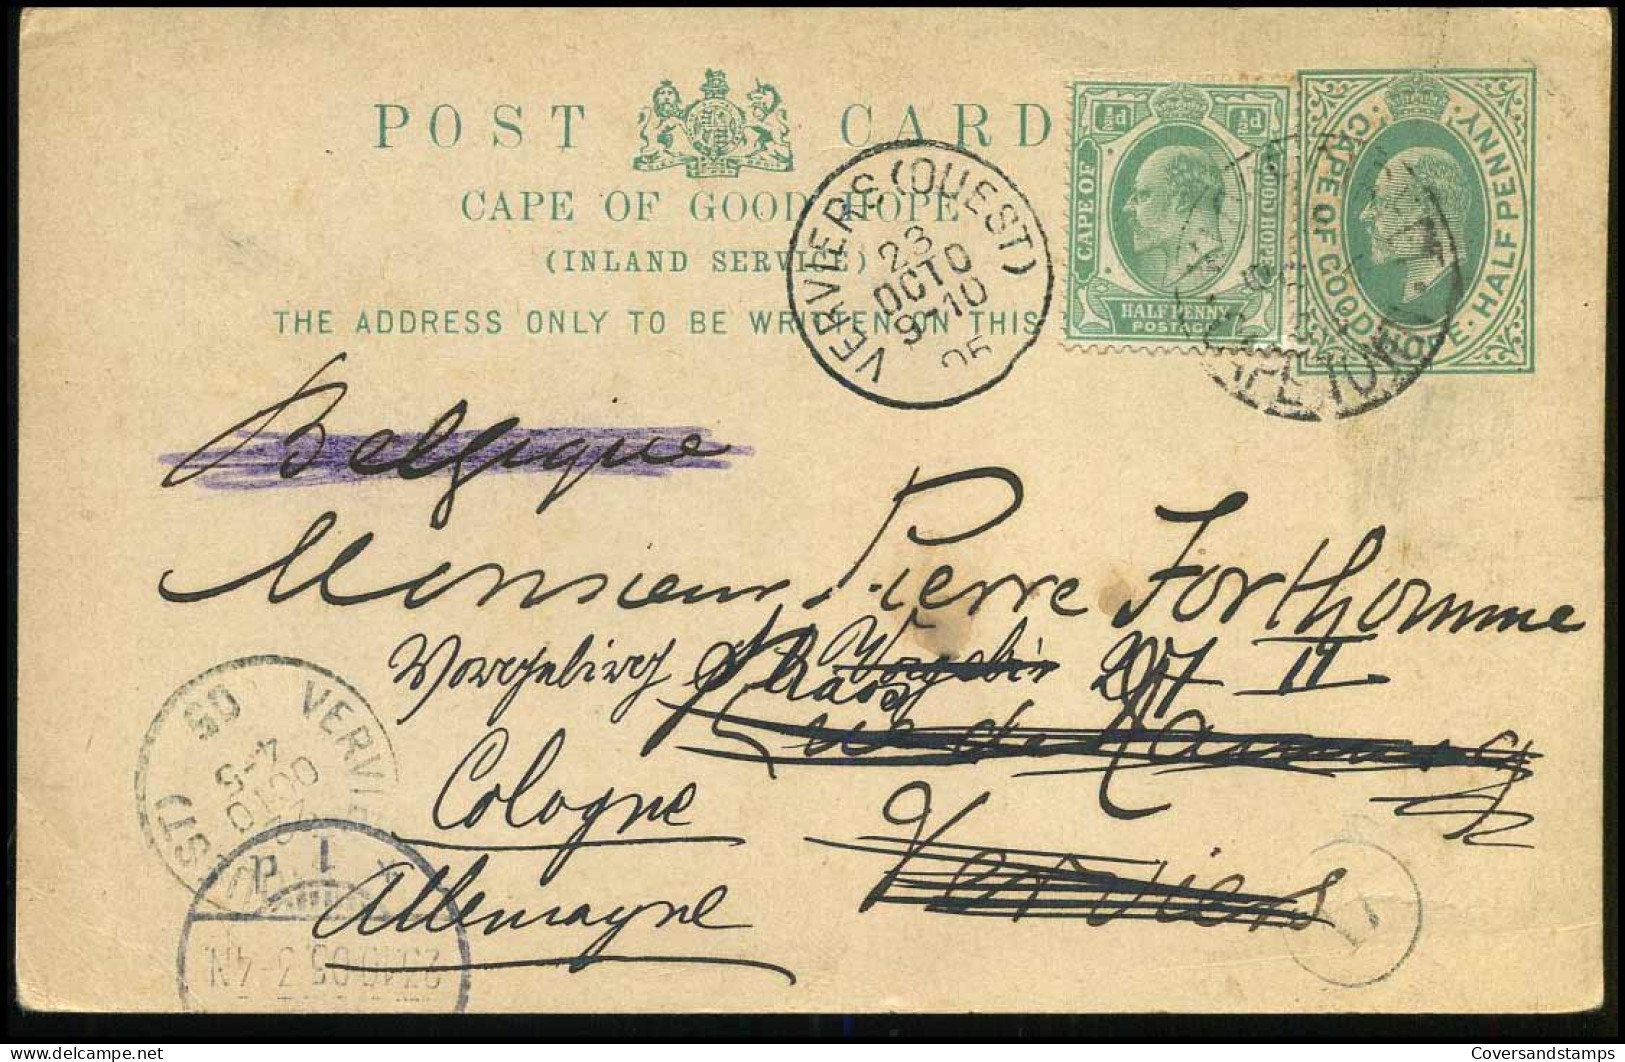 Post Card From Capetown To Verviers, Belgium, Redirected To Cologne, Germany In 1905 - Cap De Bonne Espérance (1853-1904)